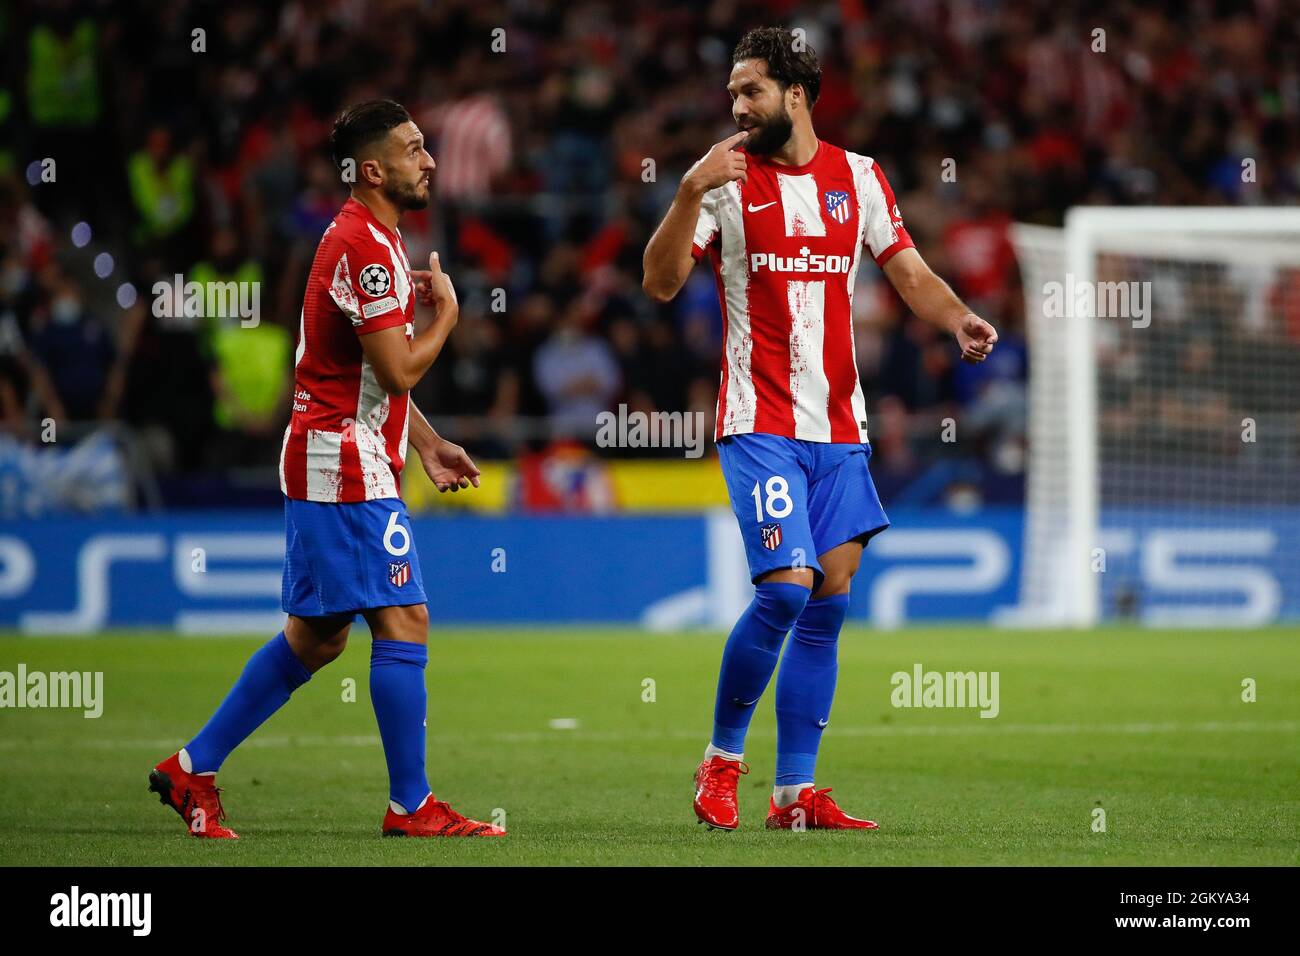 Madrid, Spain. 15th Sep 2021. Koke of Atletico de Madrid with Felipe of Atletico de Madrid during the UEFA Champions League match between Atletico de Madrid and FC Porto at Wanda Metropolitano in Madrid, Spain. Credit: DAX Images/Alamy Live News Stock Photo